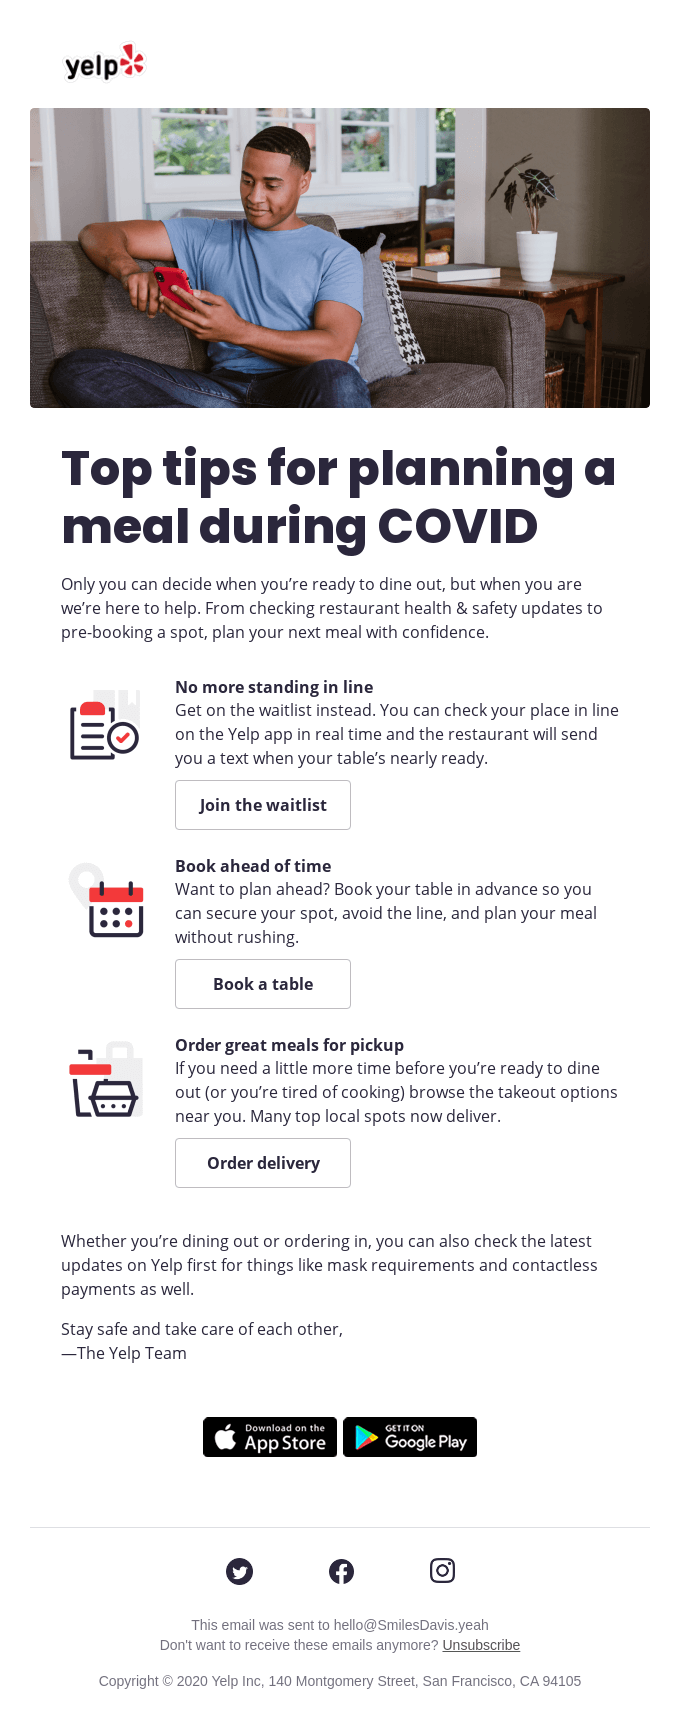 Tips for planning a meal during COVID-19